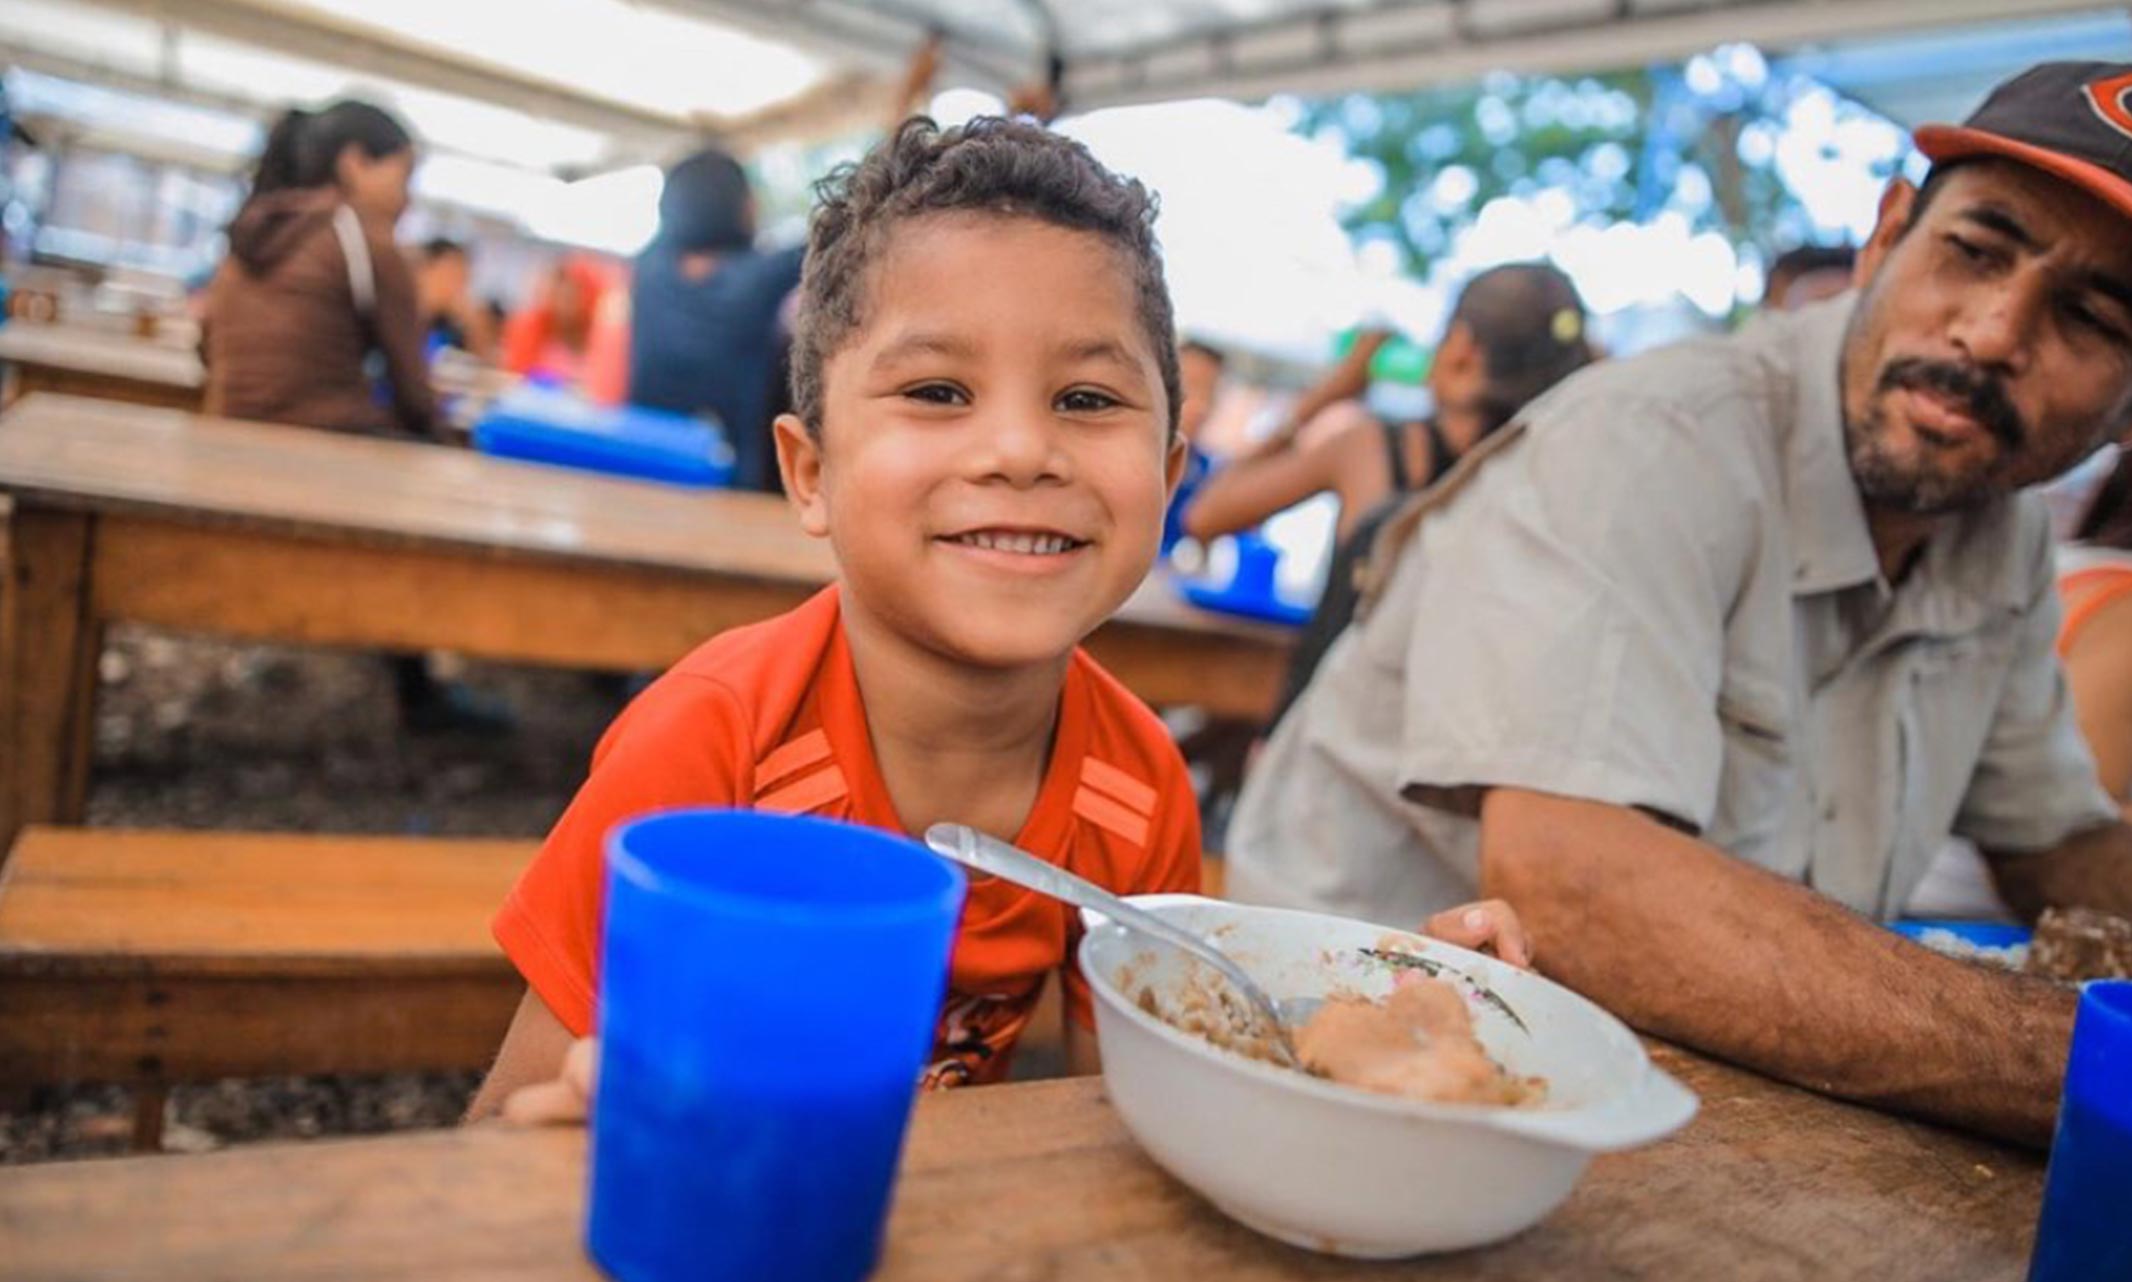 Venezuelan boy and his father eating a meal at a refugee aid center in Colombia